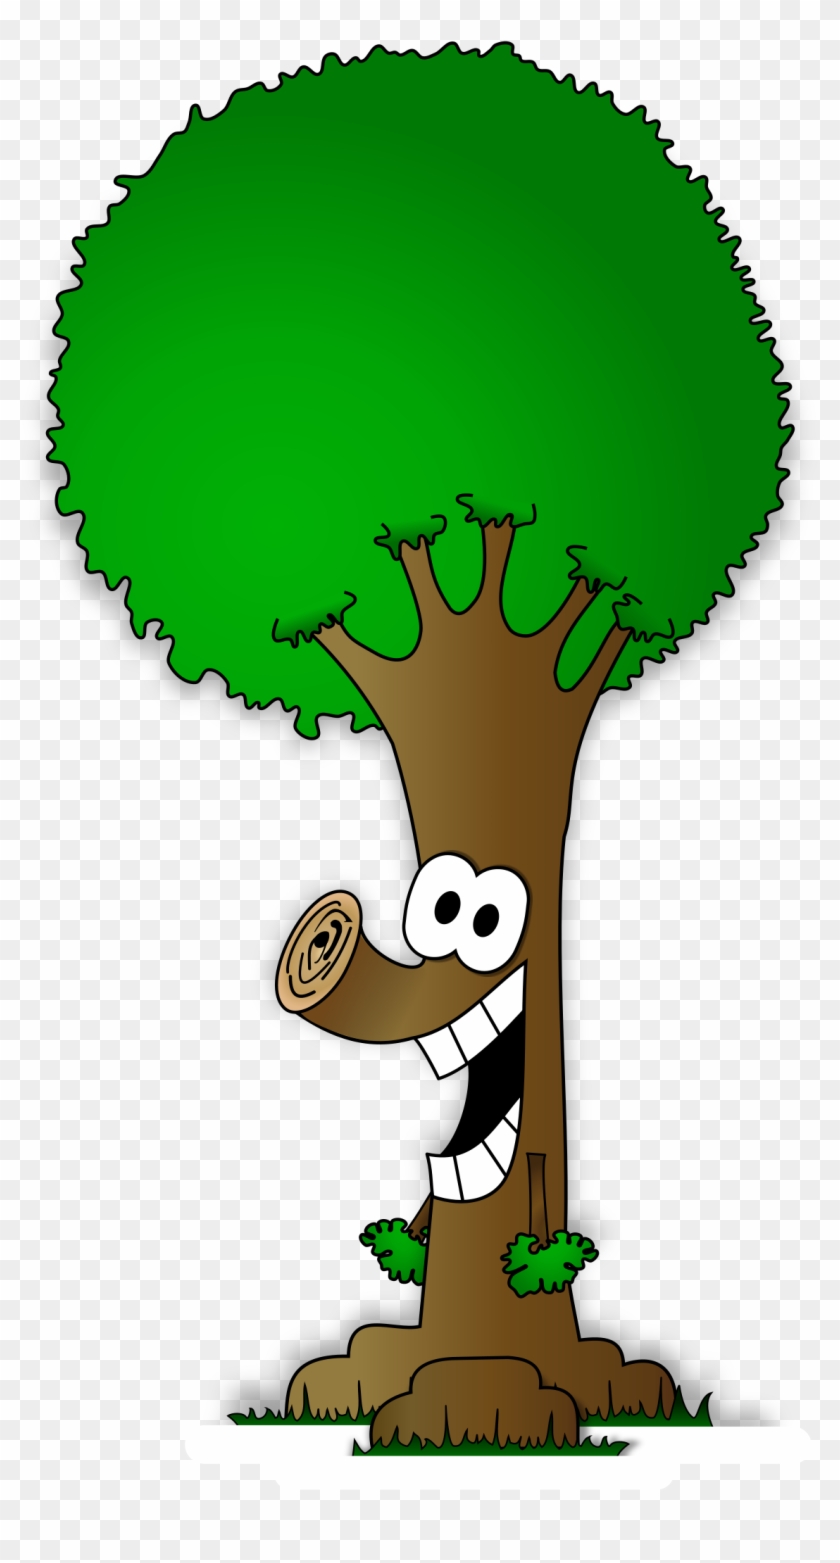 Find This Pin And More On What I Made With Inkscape - Personification Tree #379218